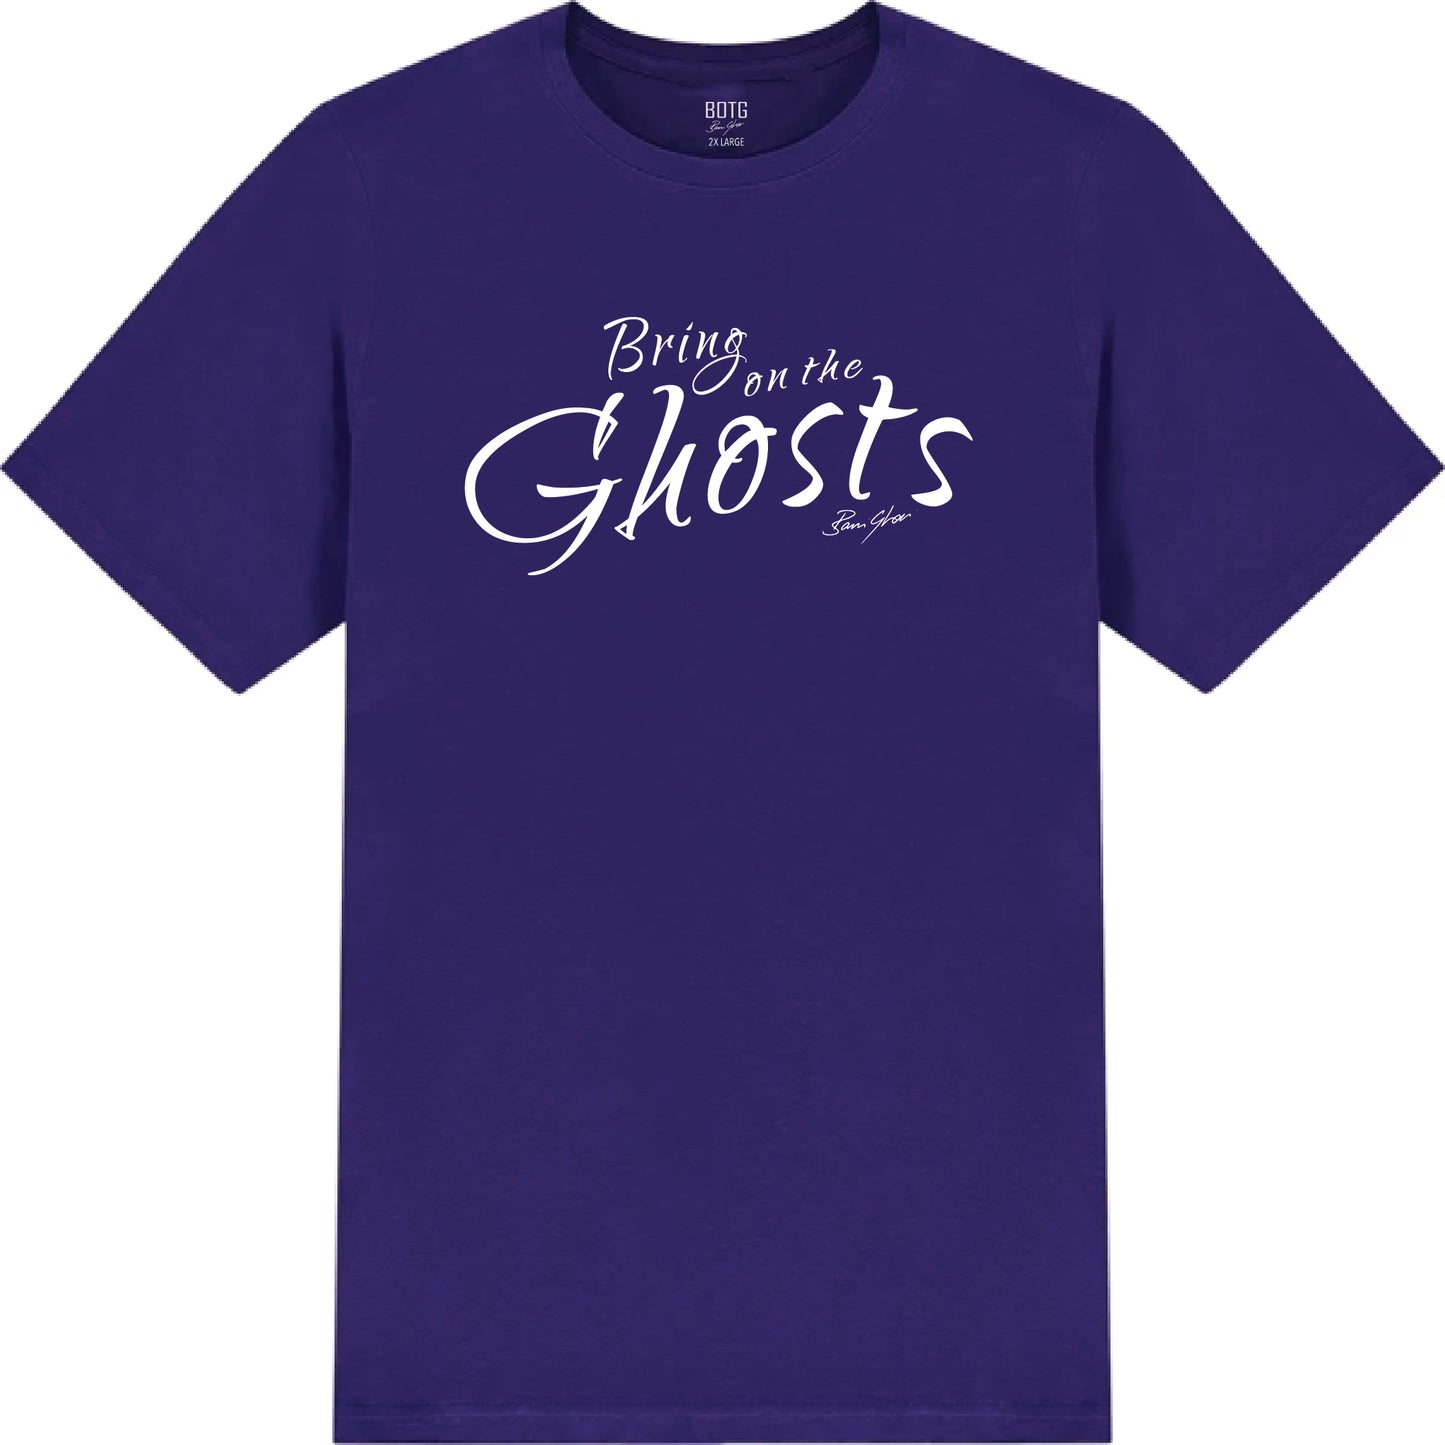 Bring On The Ghosts - Catchprase Tee